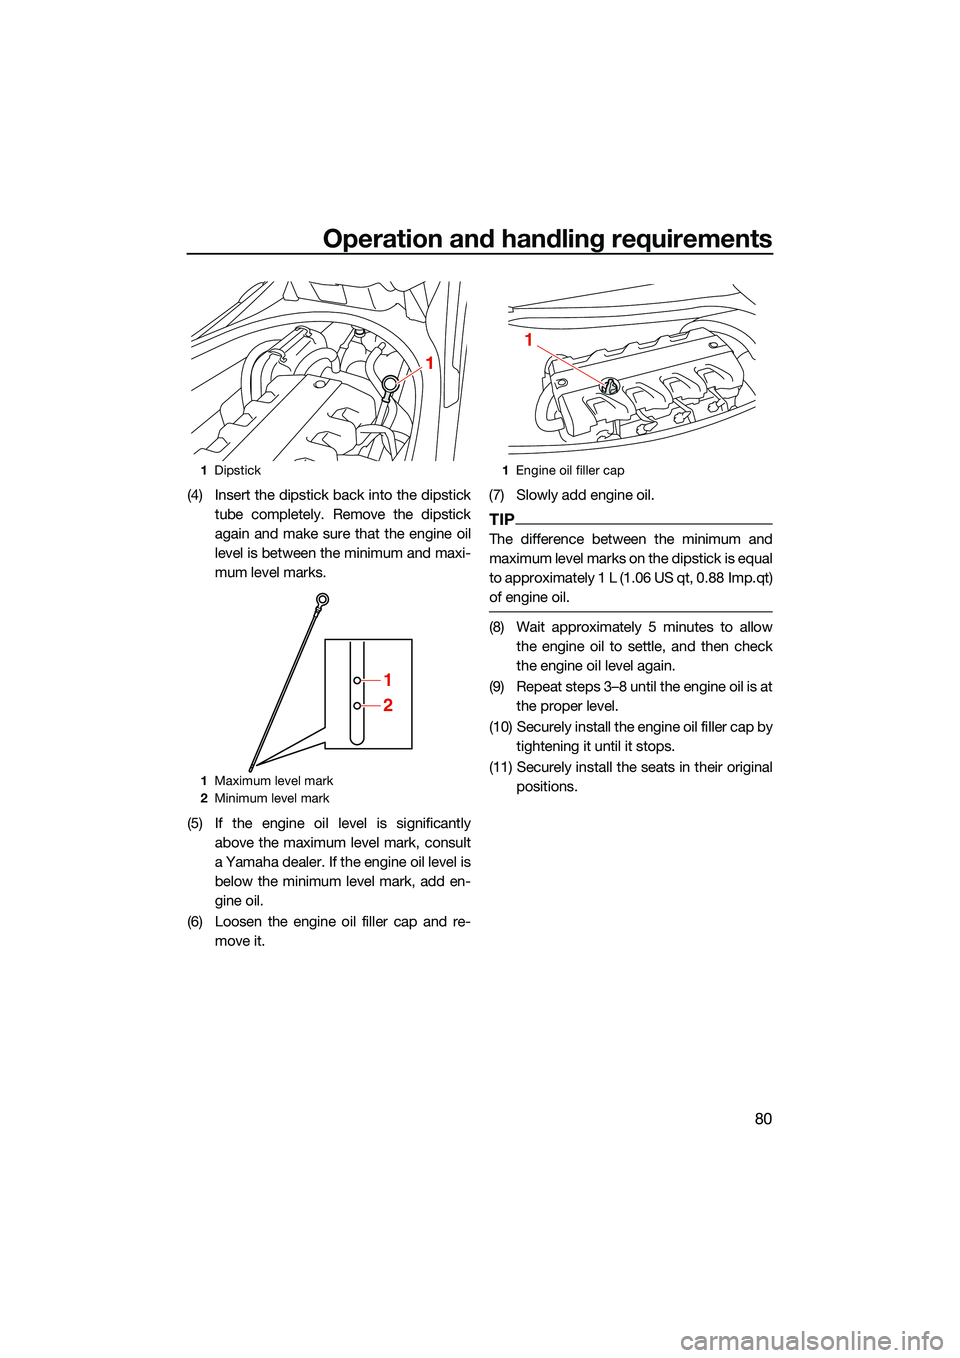 YAMAHA FX HO CRUISER 2022  Owners Manual Operation and handling requirements
80
(4) Insert the dipstick back into the dipsticktube completely. Remove the dipstick
again and make sure that the engine oil
level is between the minimum and maxi-